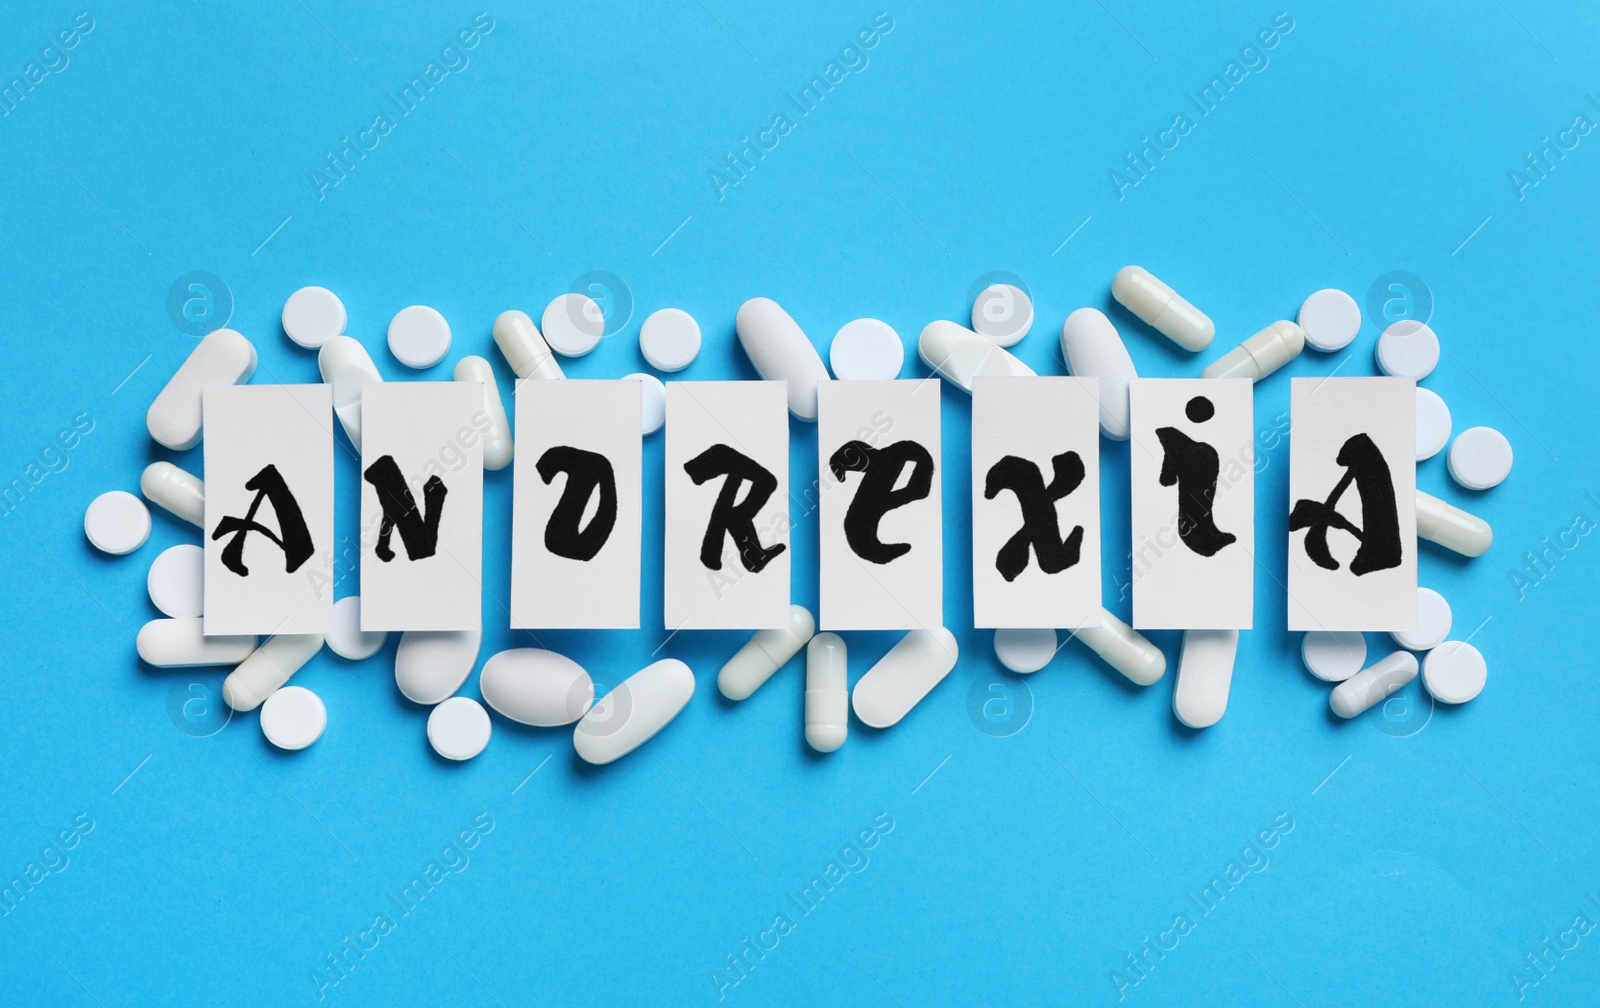 Photo of Pills and word Anorexia made of paper pieces on light blue background, flat lay